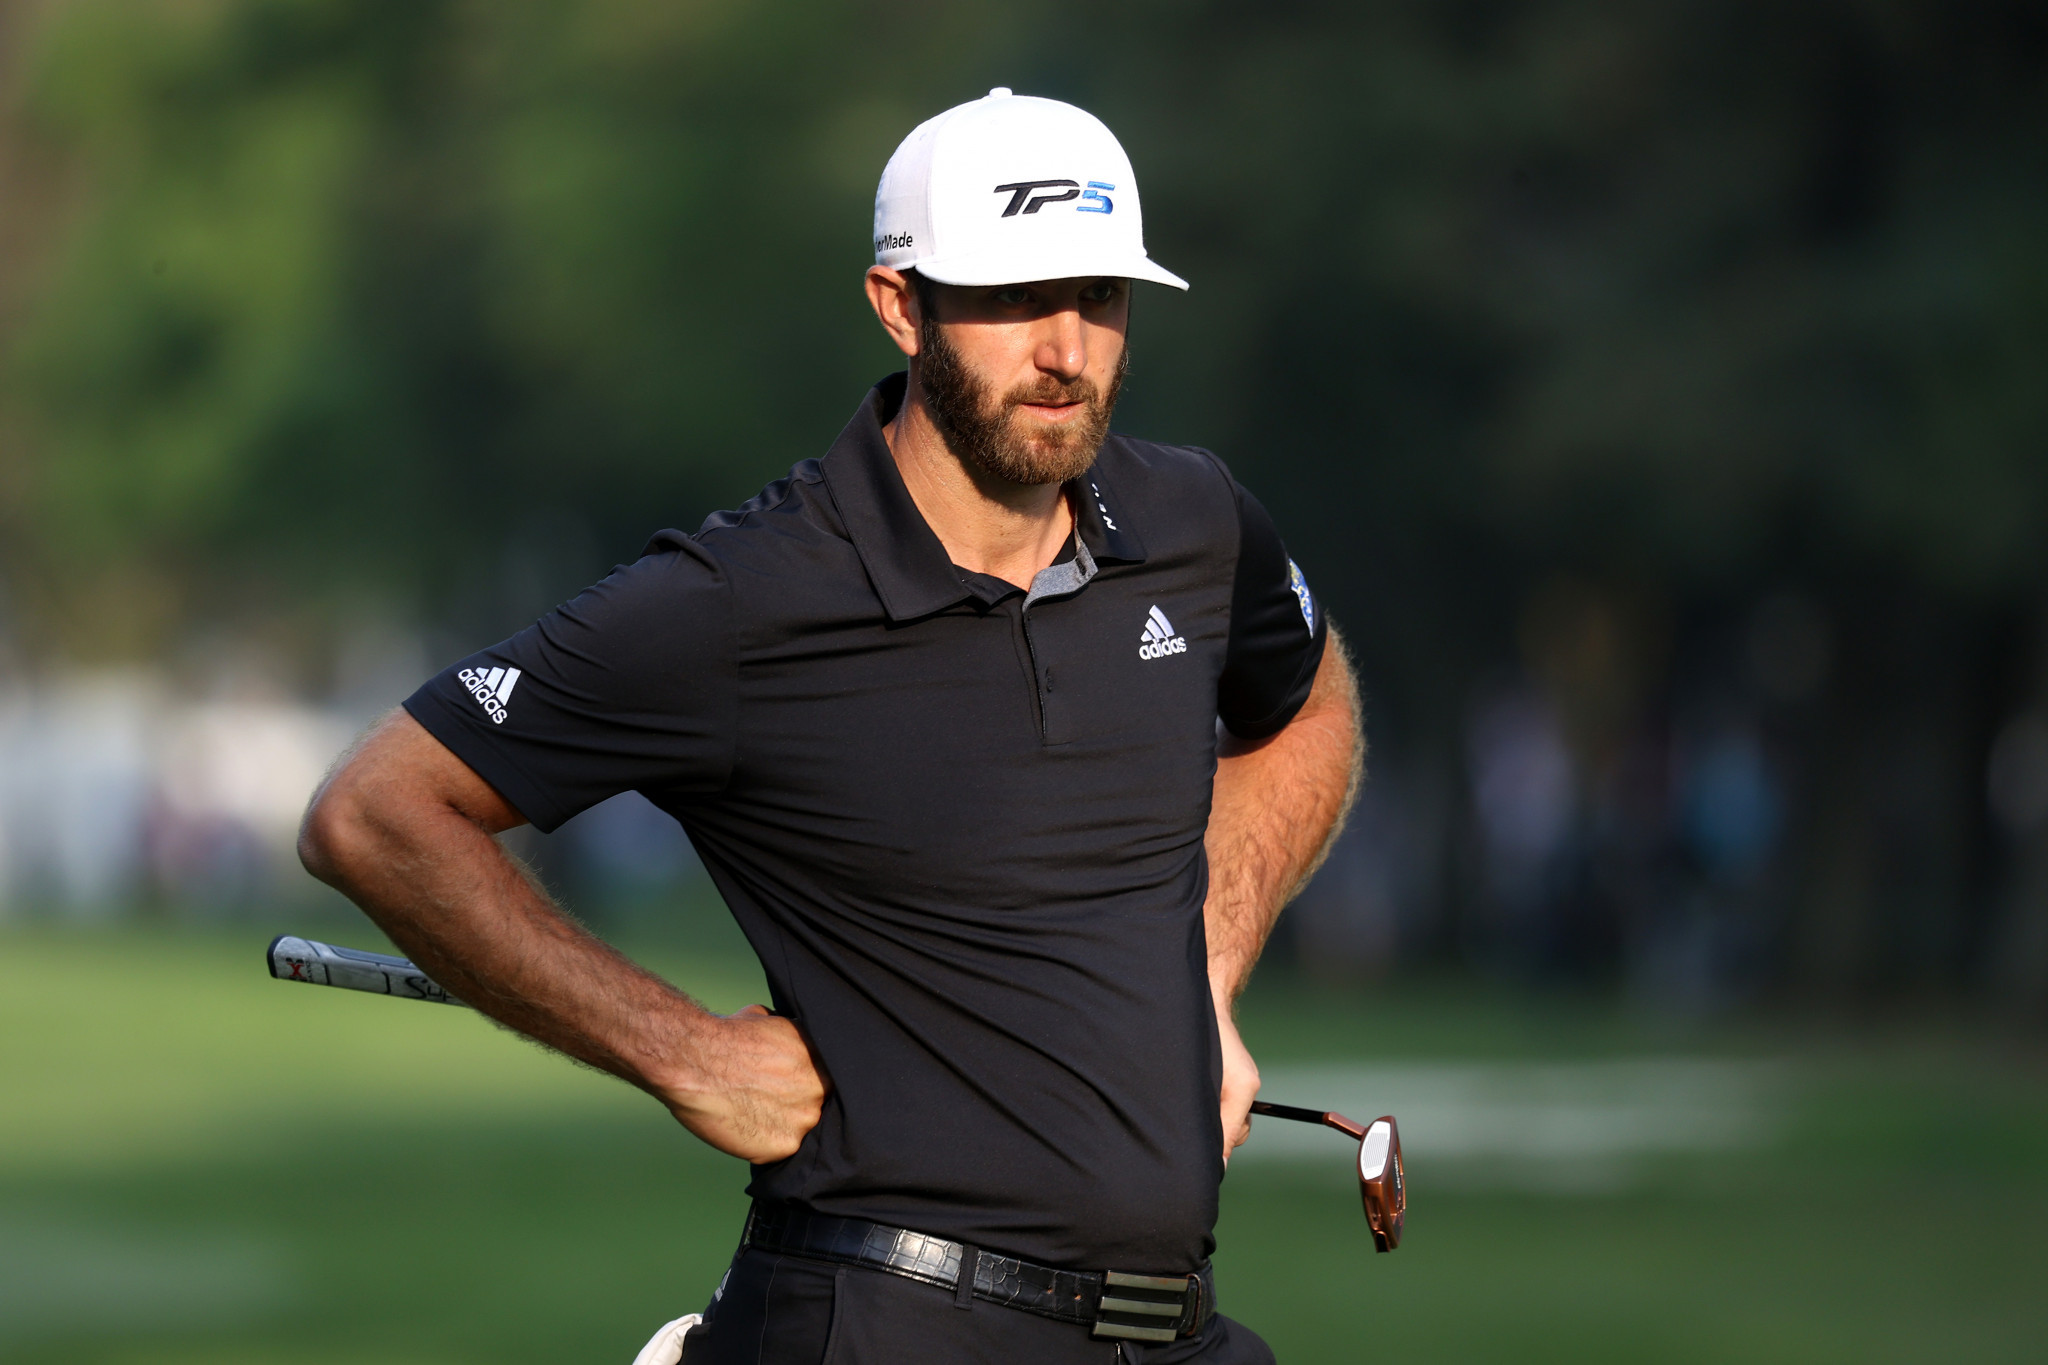 Dustin Johnson has decided not to compete at Tokyo 2020 ©Getty Images